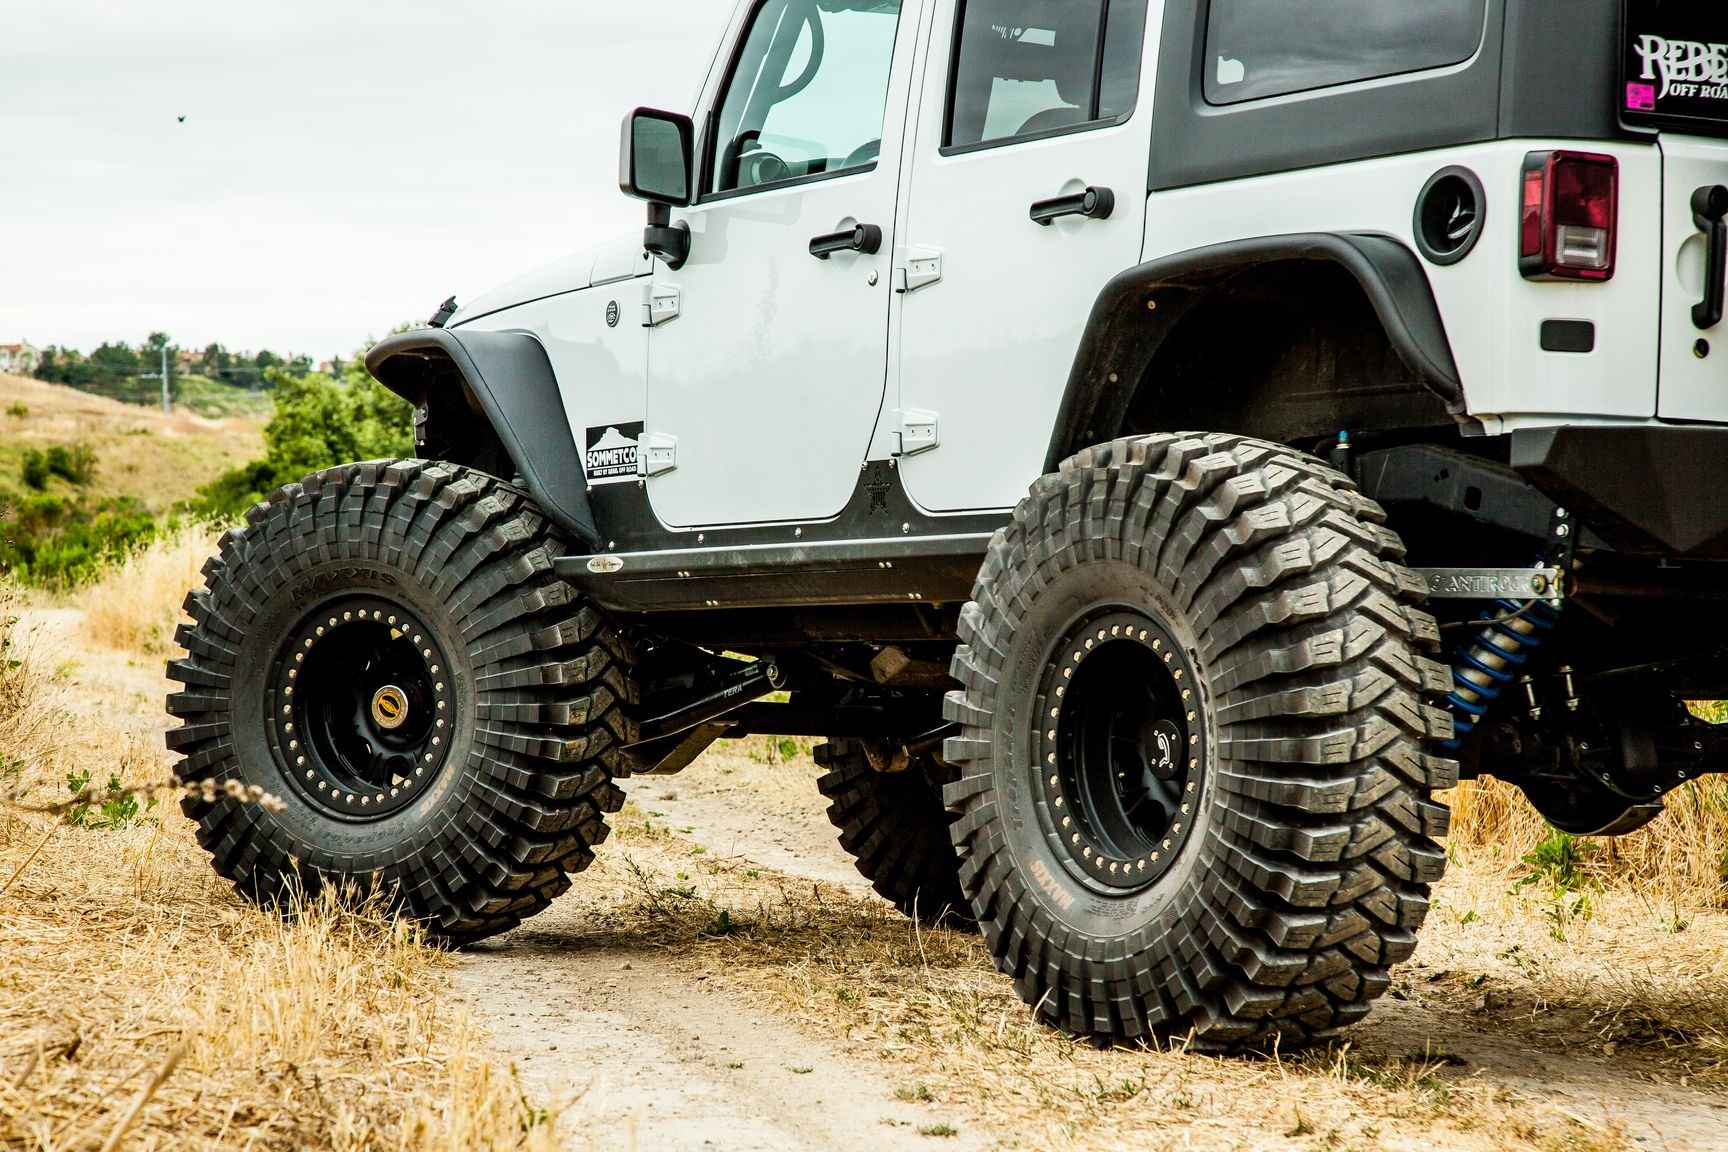 White Lifted Jeep Wrangler with Aftermarket Fender Flares - Photo by Rebel Off-Road